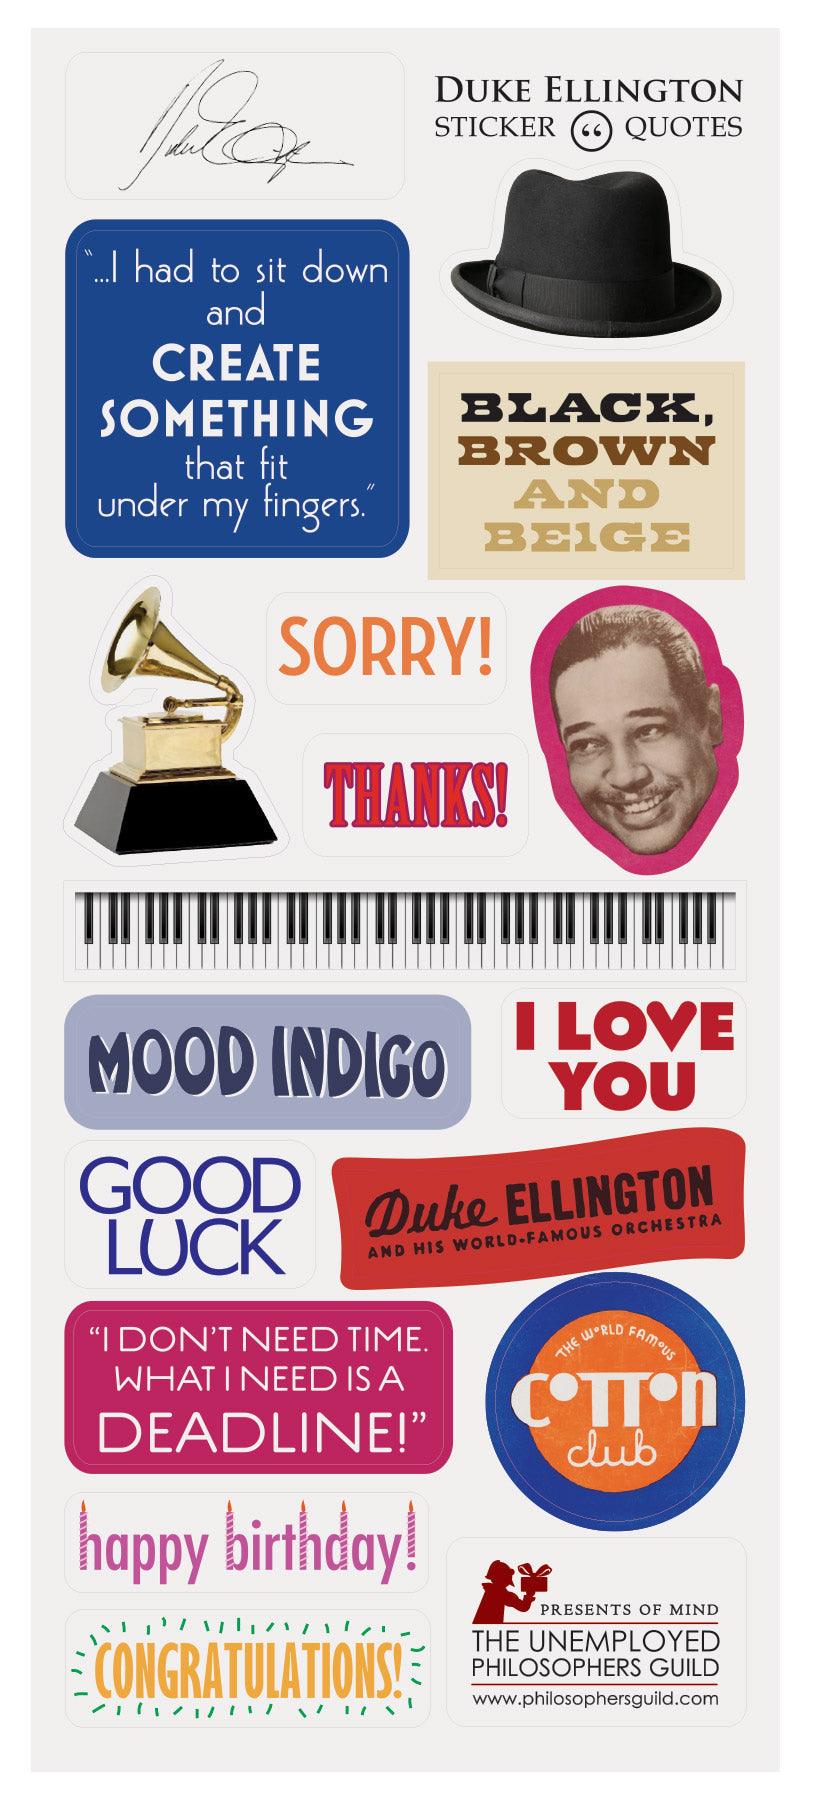 Product photo of Duke Ellington Quotable Notable, a novelty gift manufactured by The Unemployed Philosophers Guild.